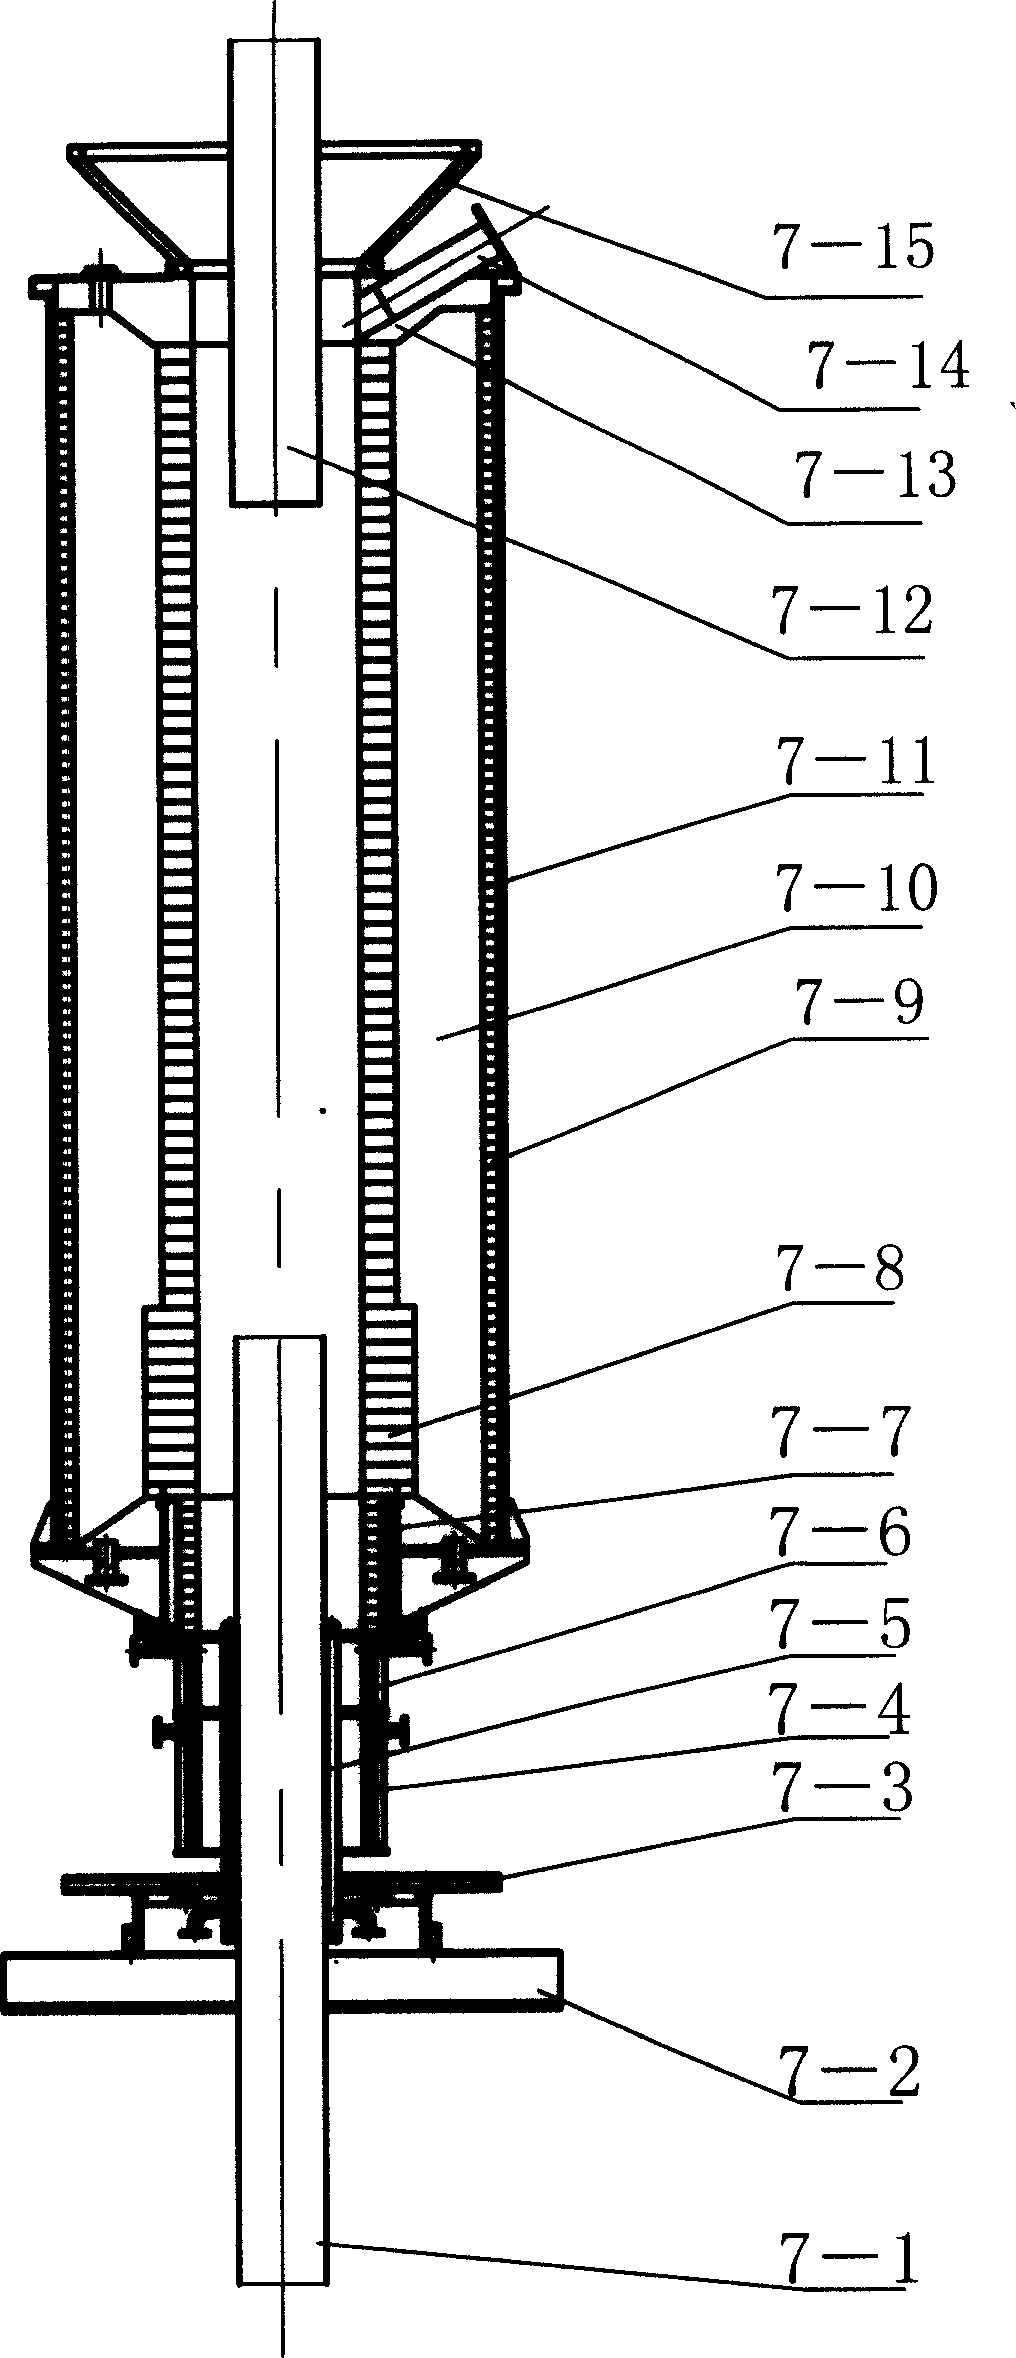 Continuous production and apparatus for high-purity graphite carbon material